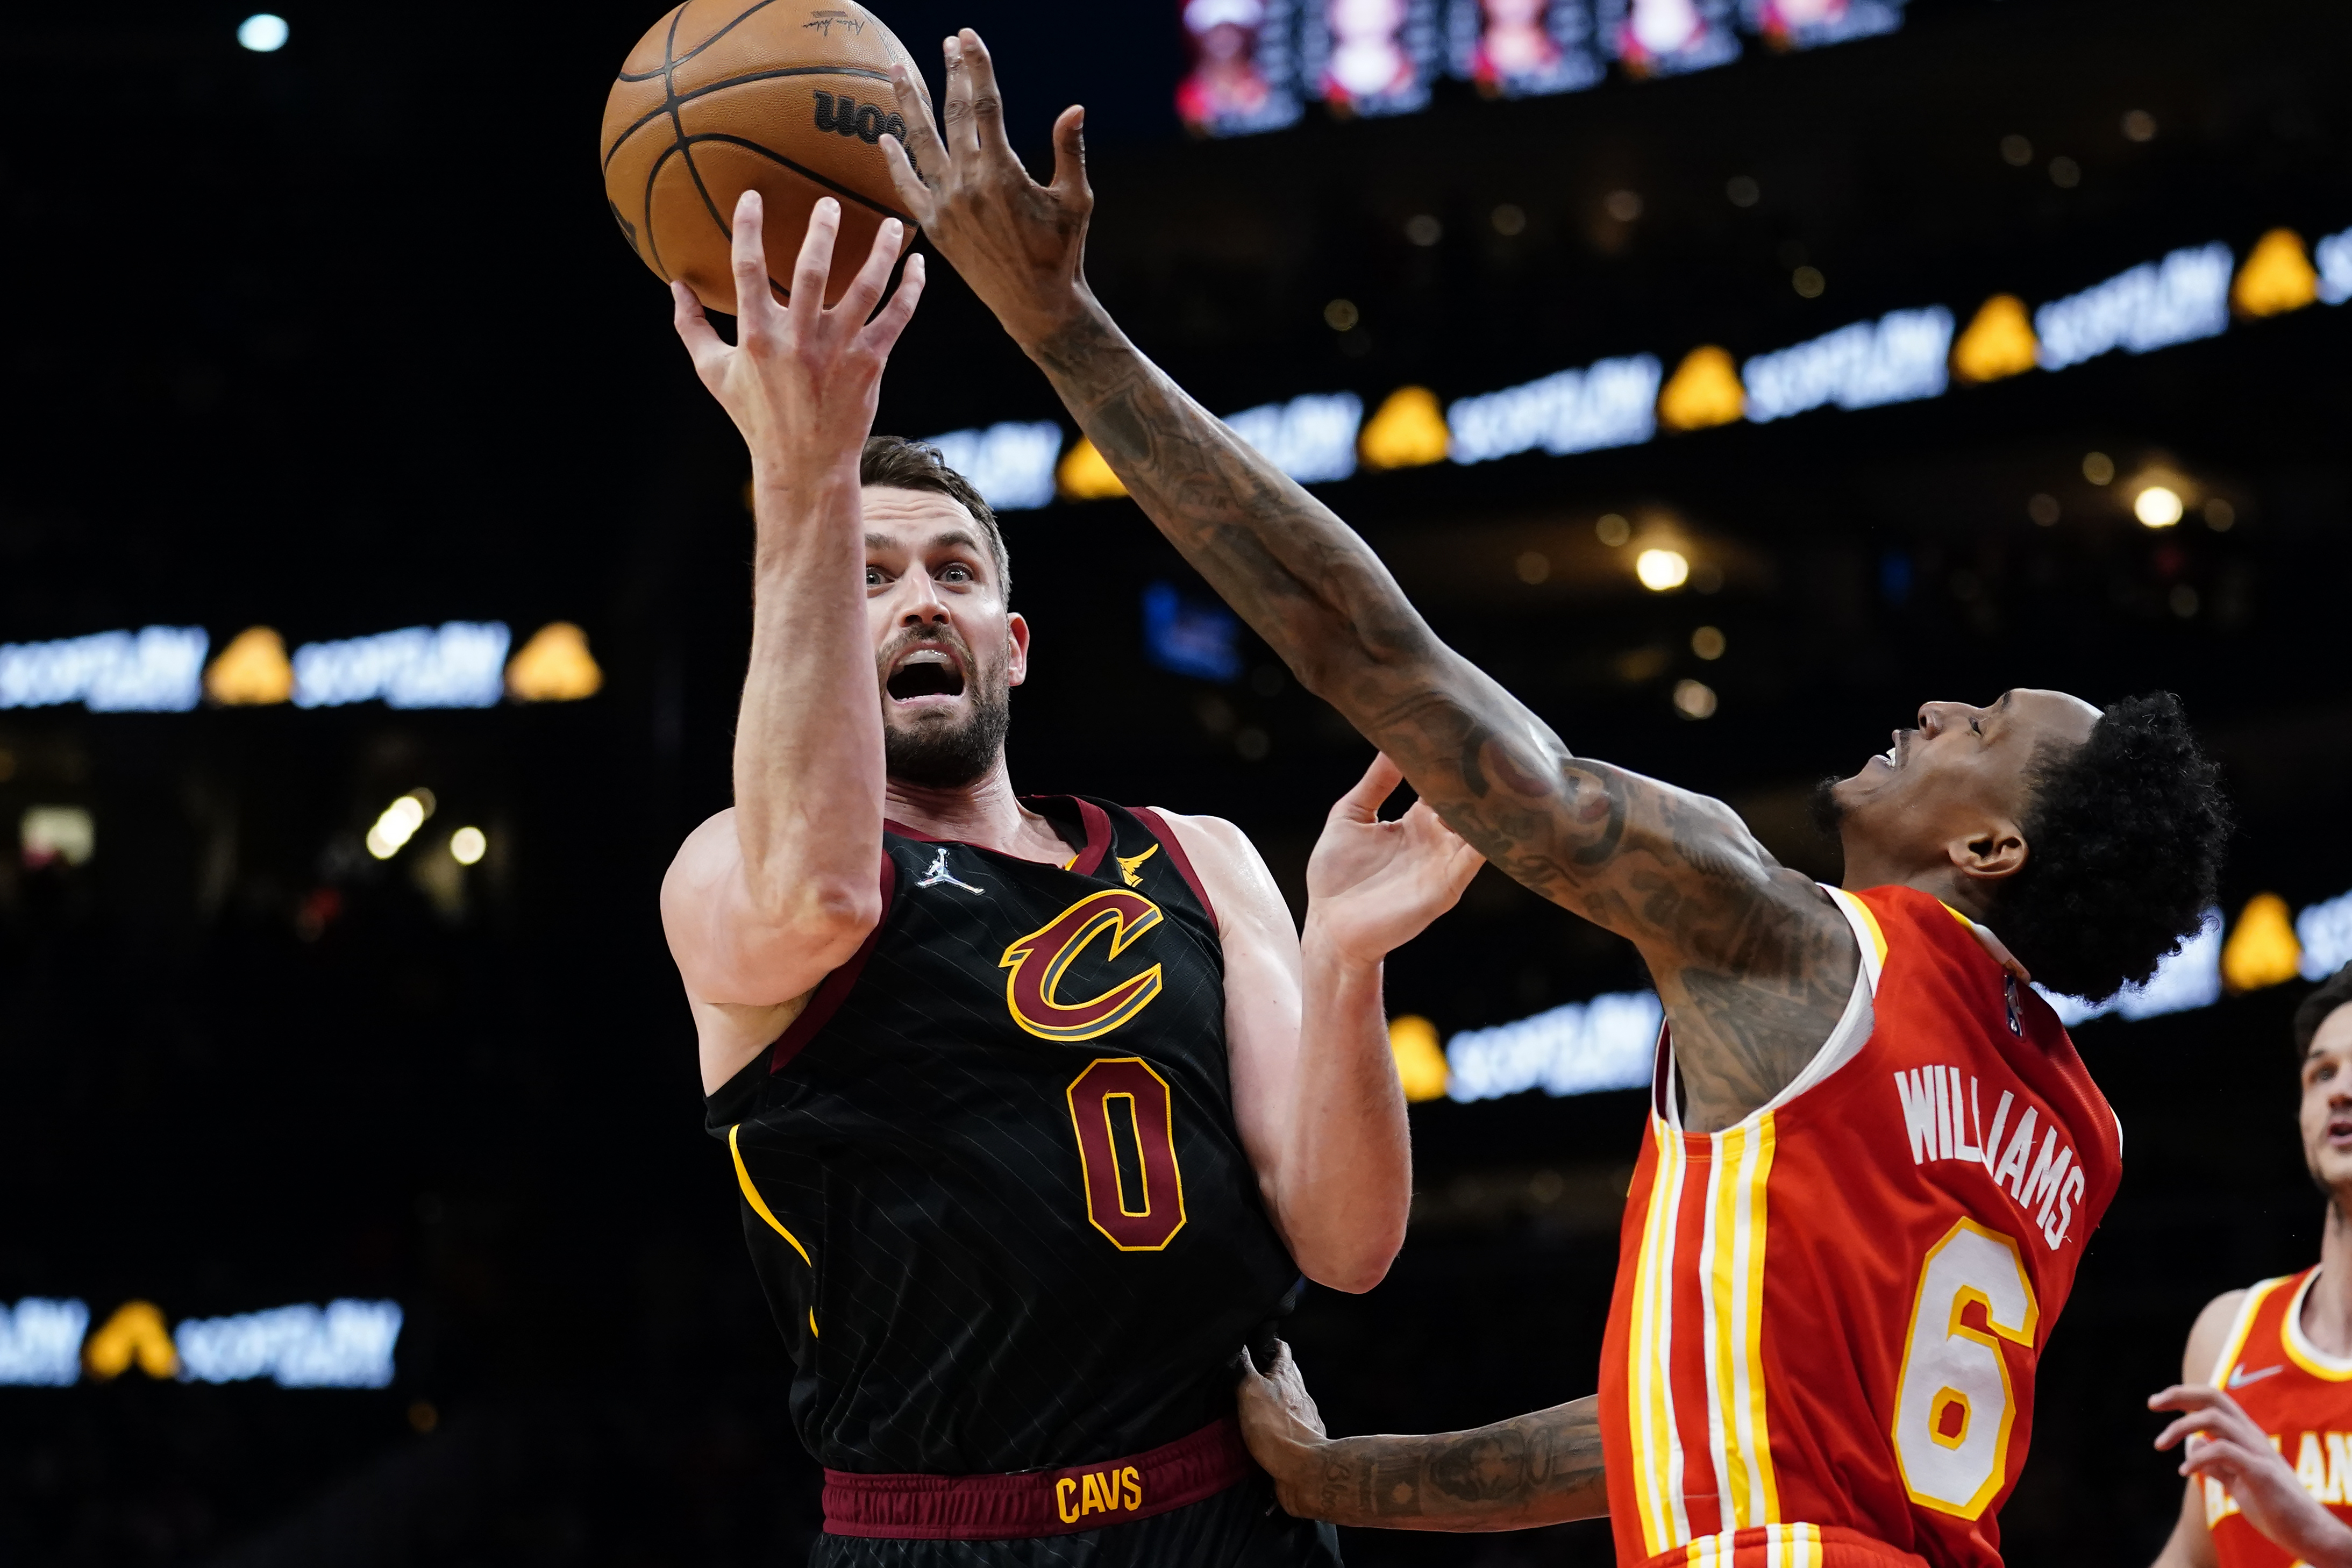 Young scores 41 for Hawks to hand 124-116 loss to Cavaliers